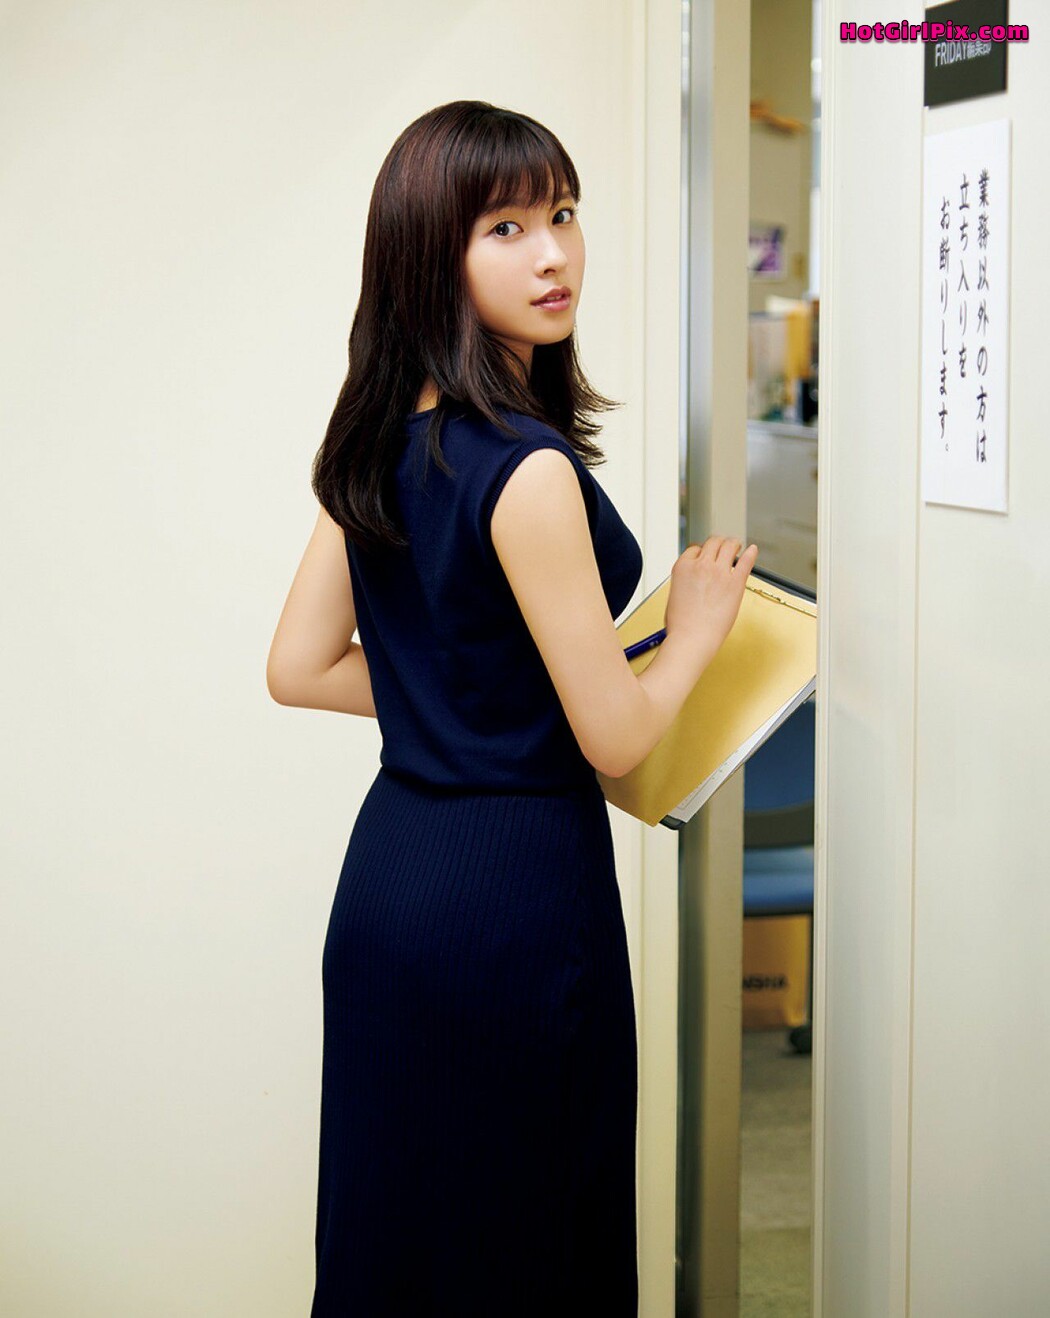 [FRIDAY] Tao Tsuchiya - "Sexy in the office" Photo Cover Photo